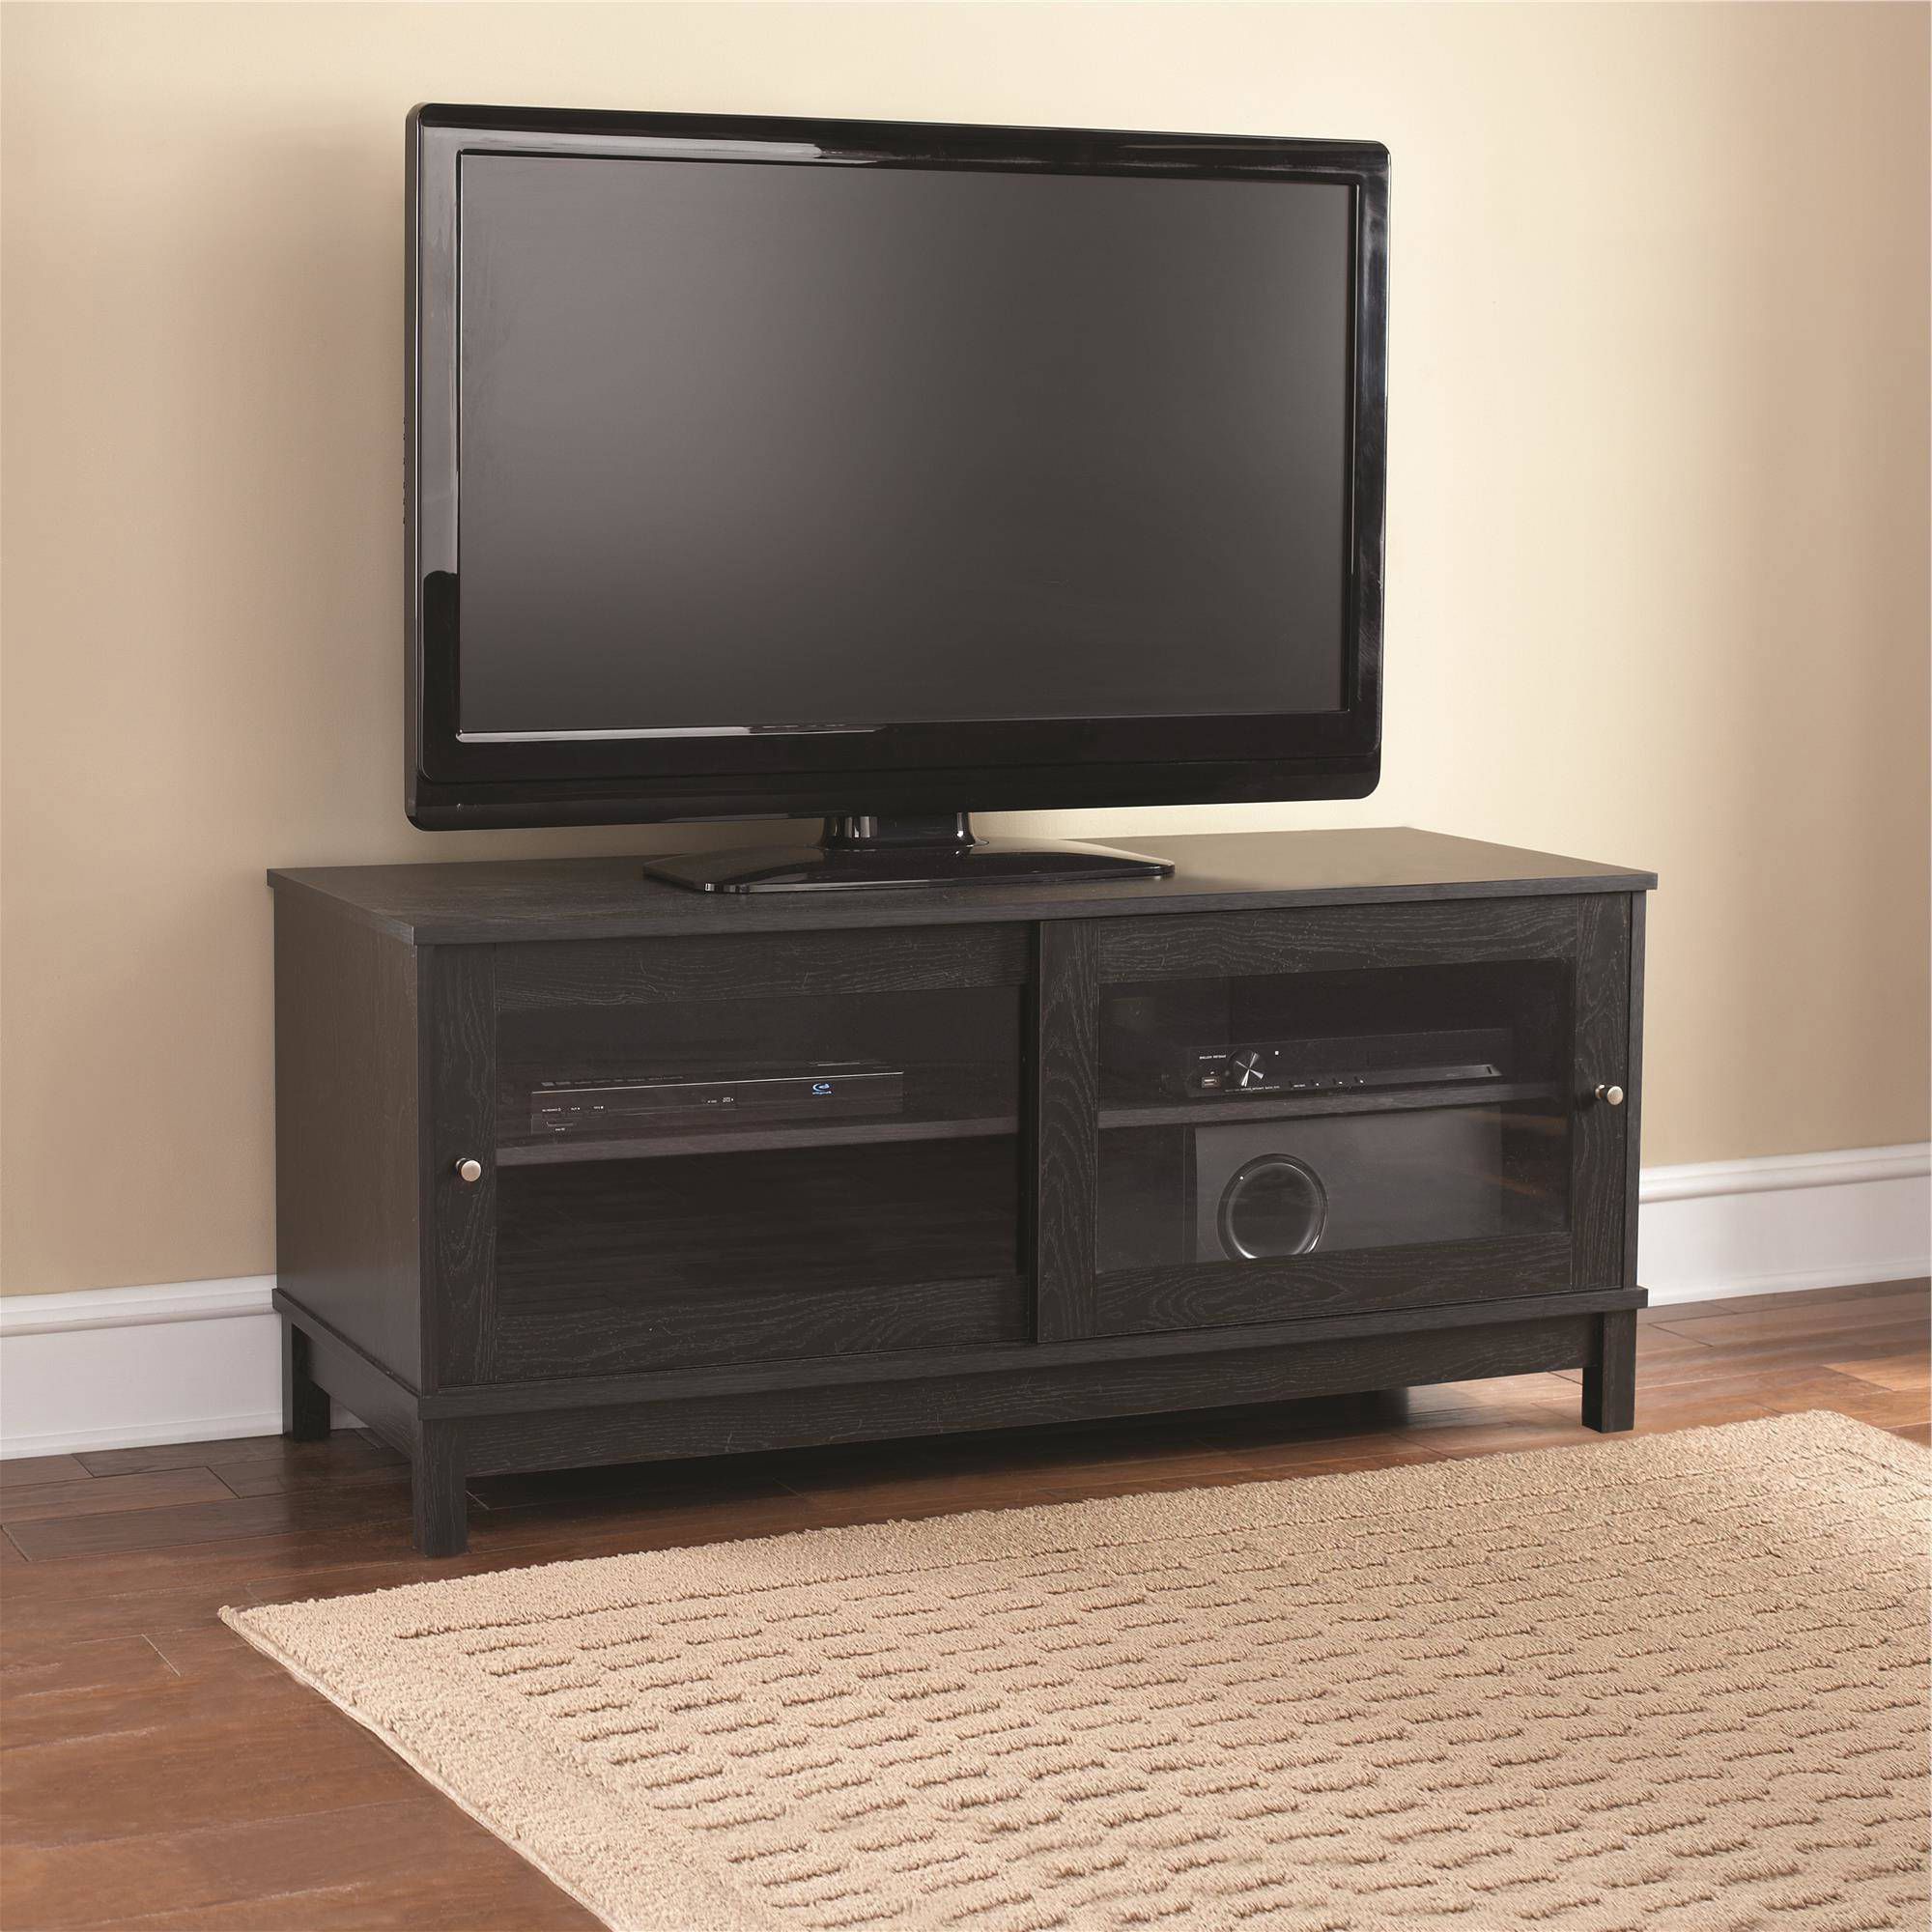 Popular Mainstays 55" Tv Stand With Sliding Glass Doors, Multiple Colors With Regard To Contemporary Glass Tv Stands (View 9 of 20)